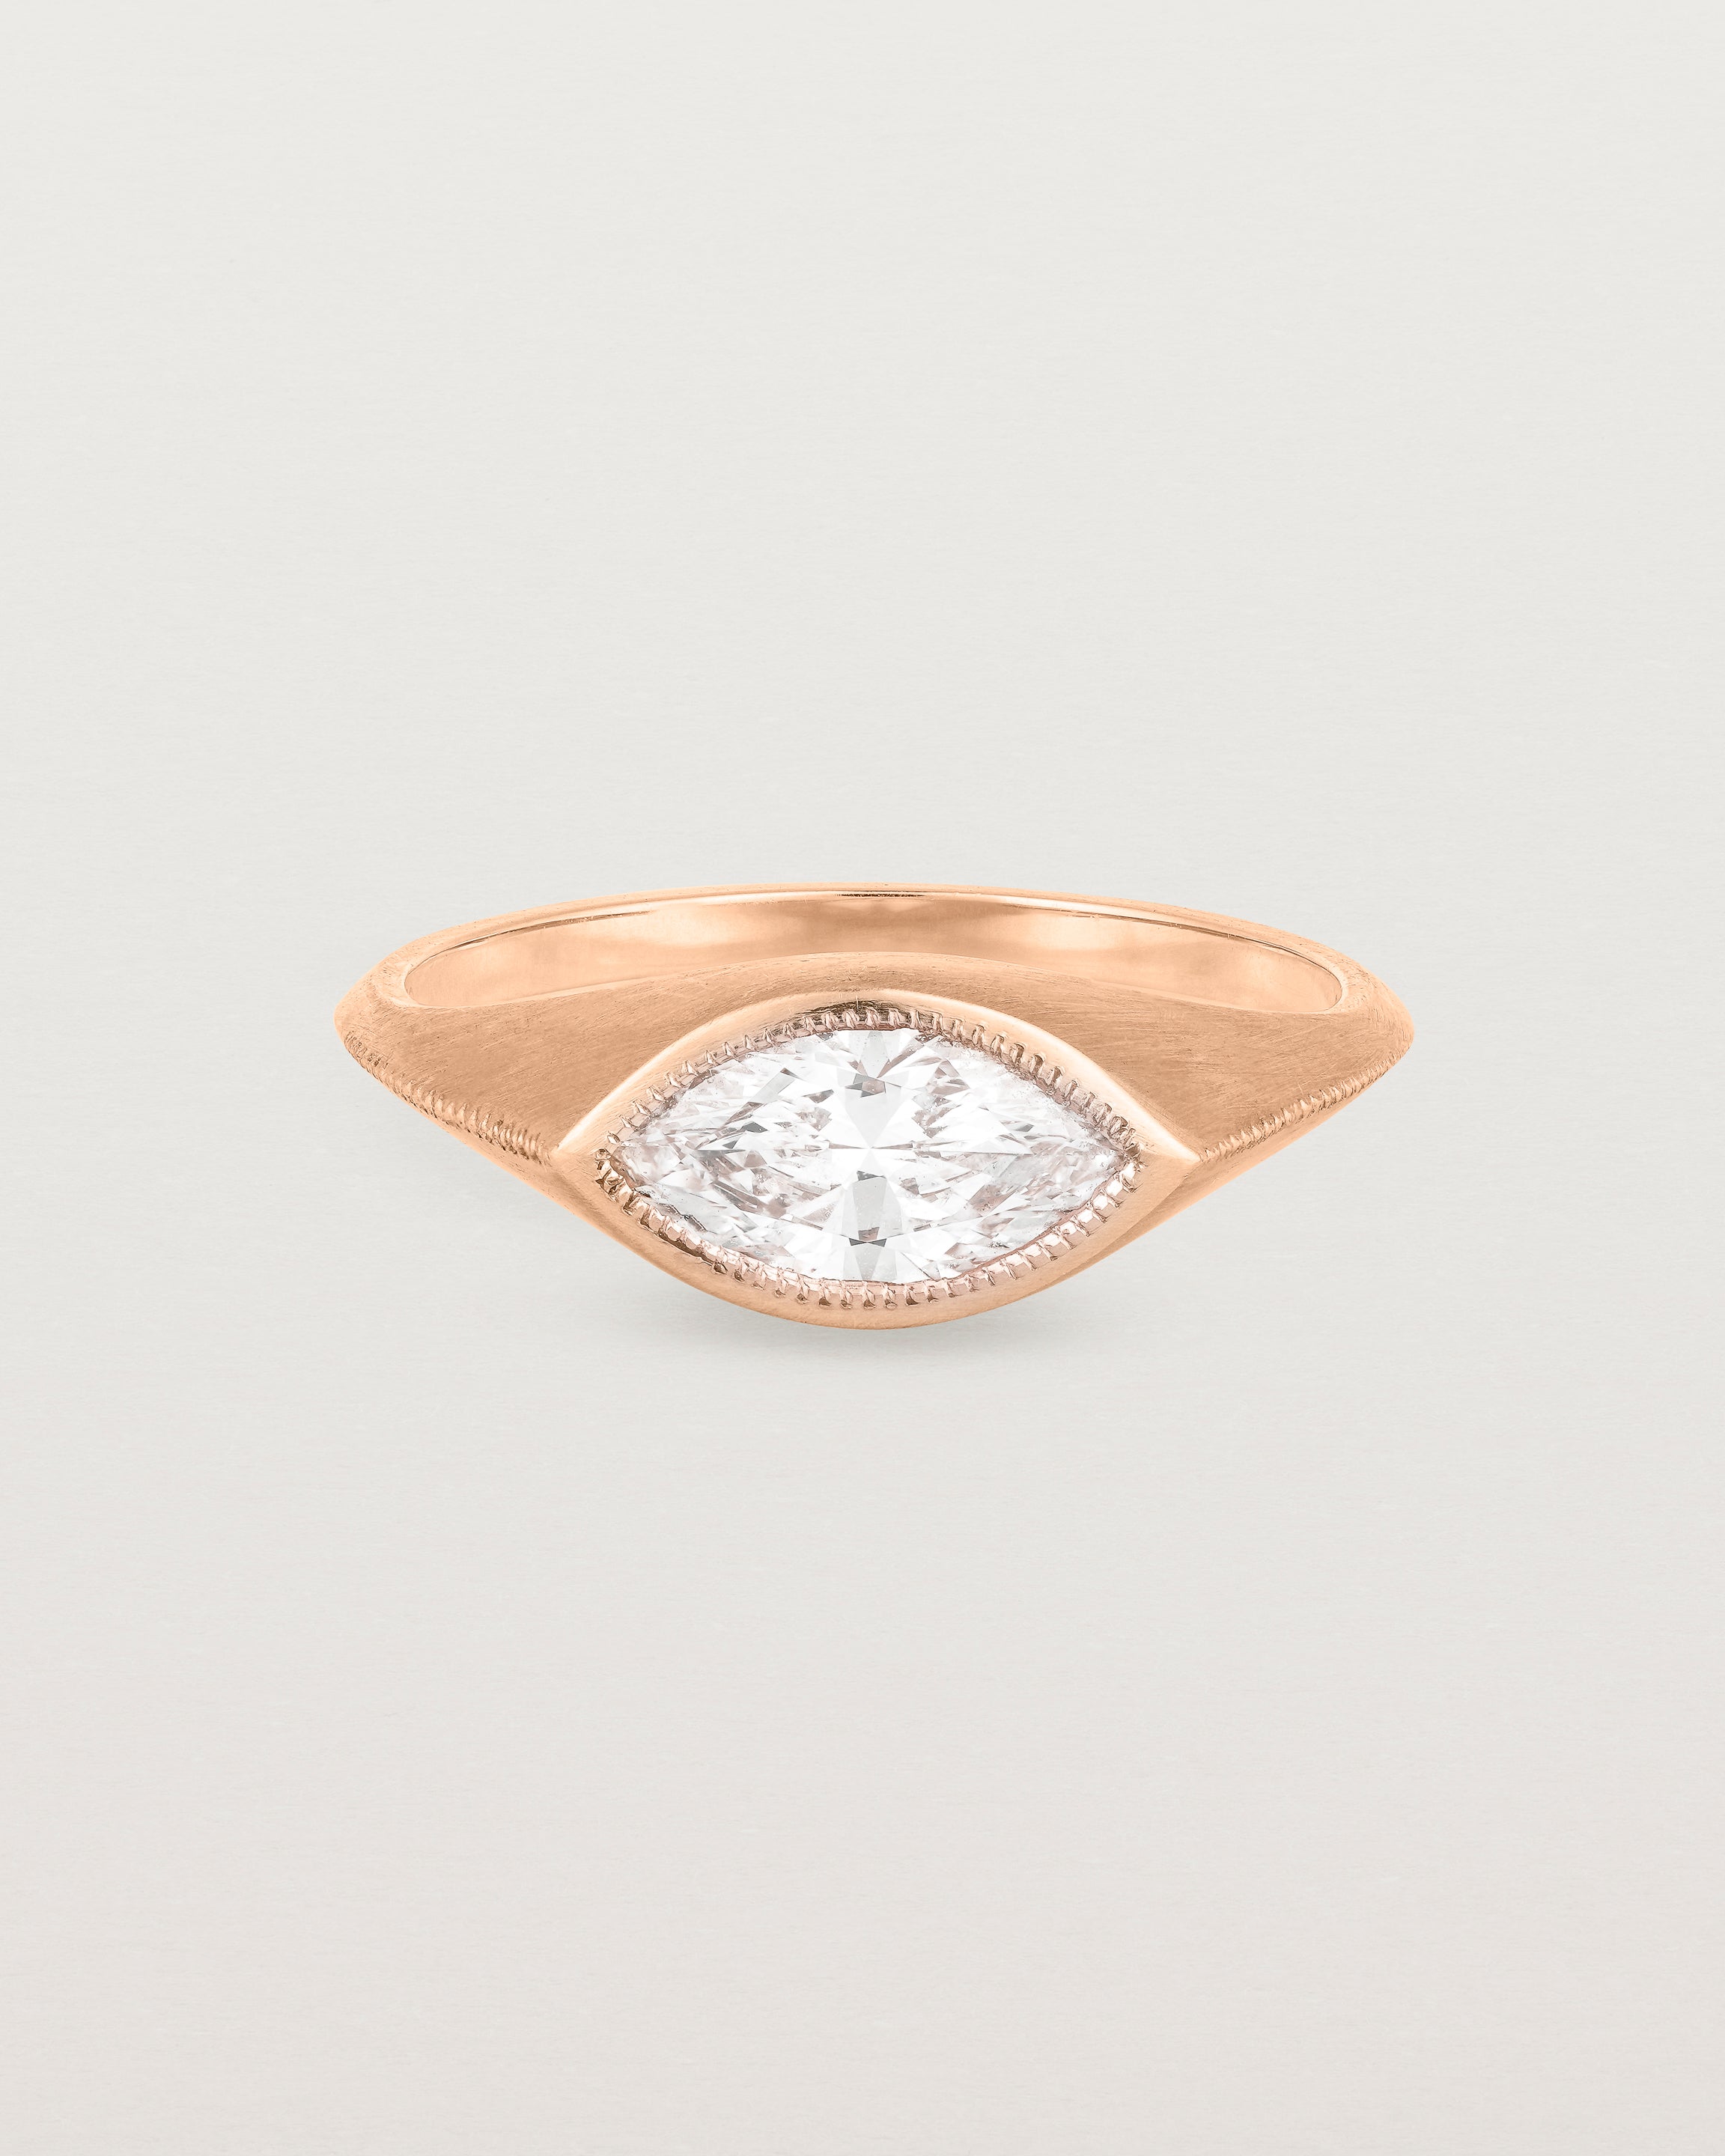 A rose gold Signet Ring featuring a marquise cut white diamond